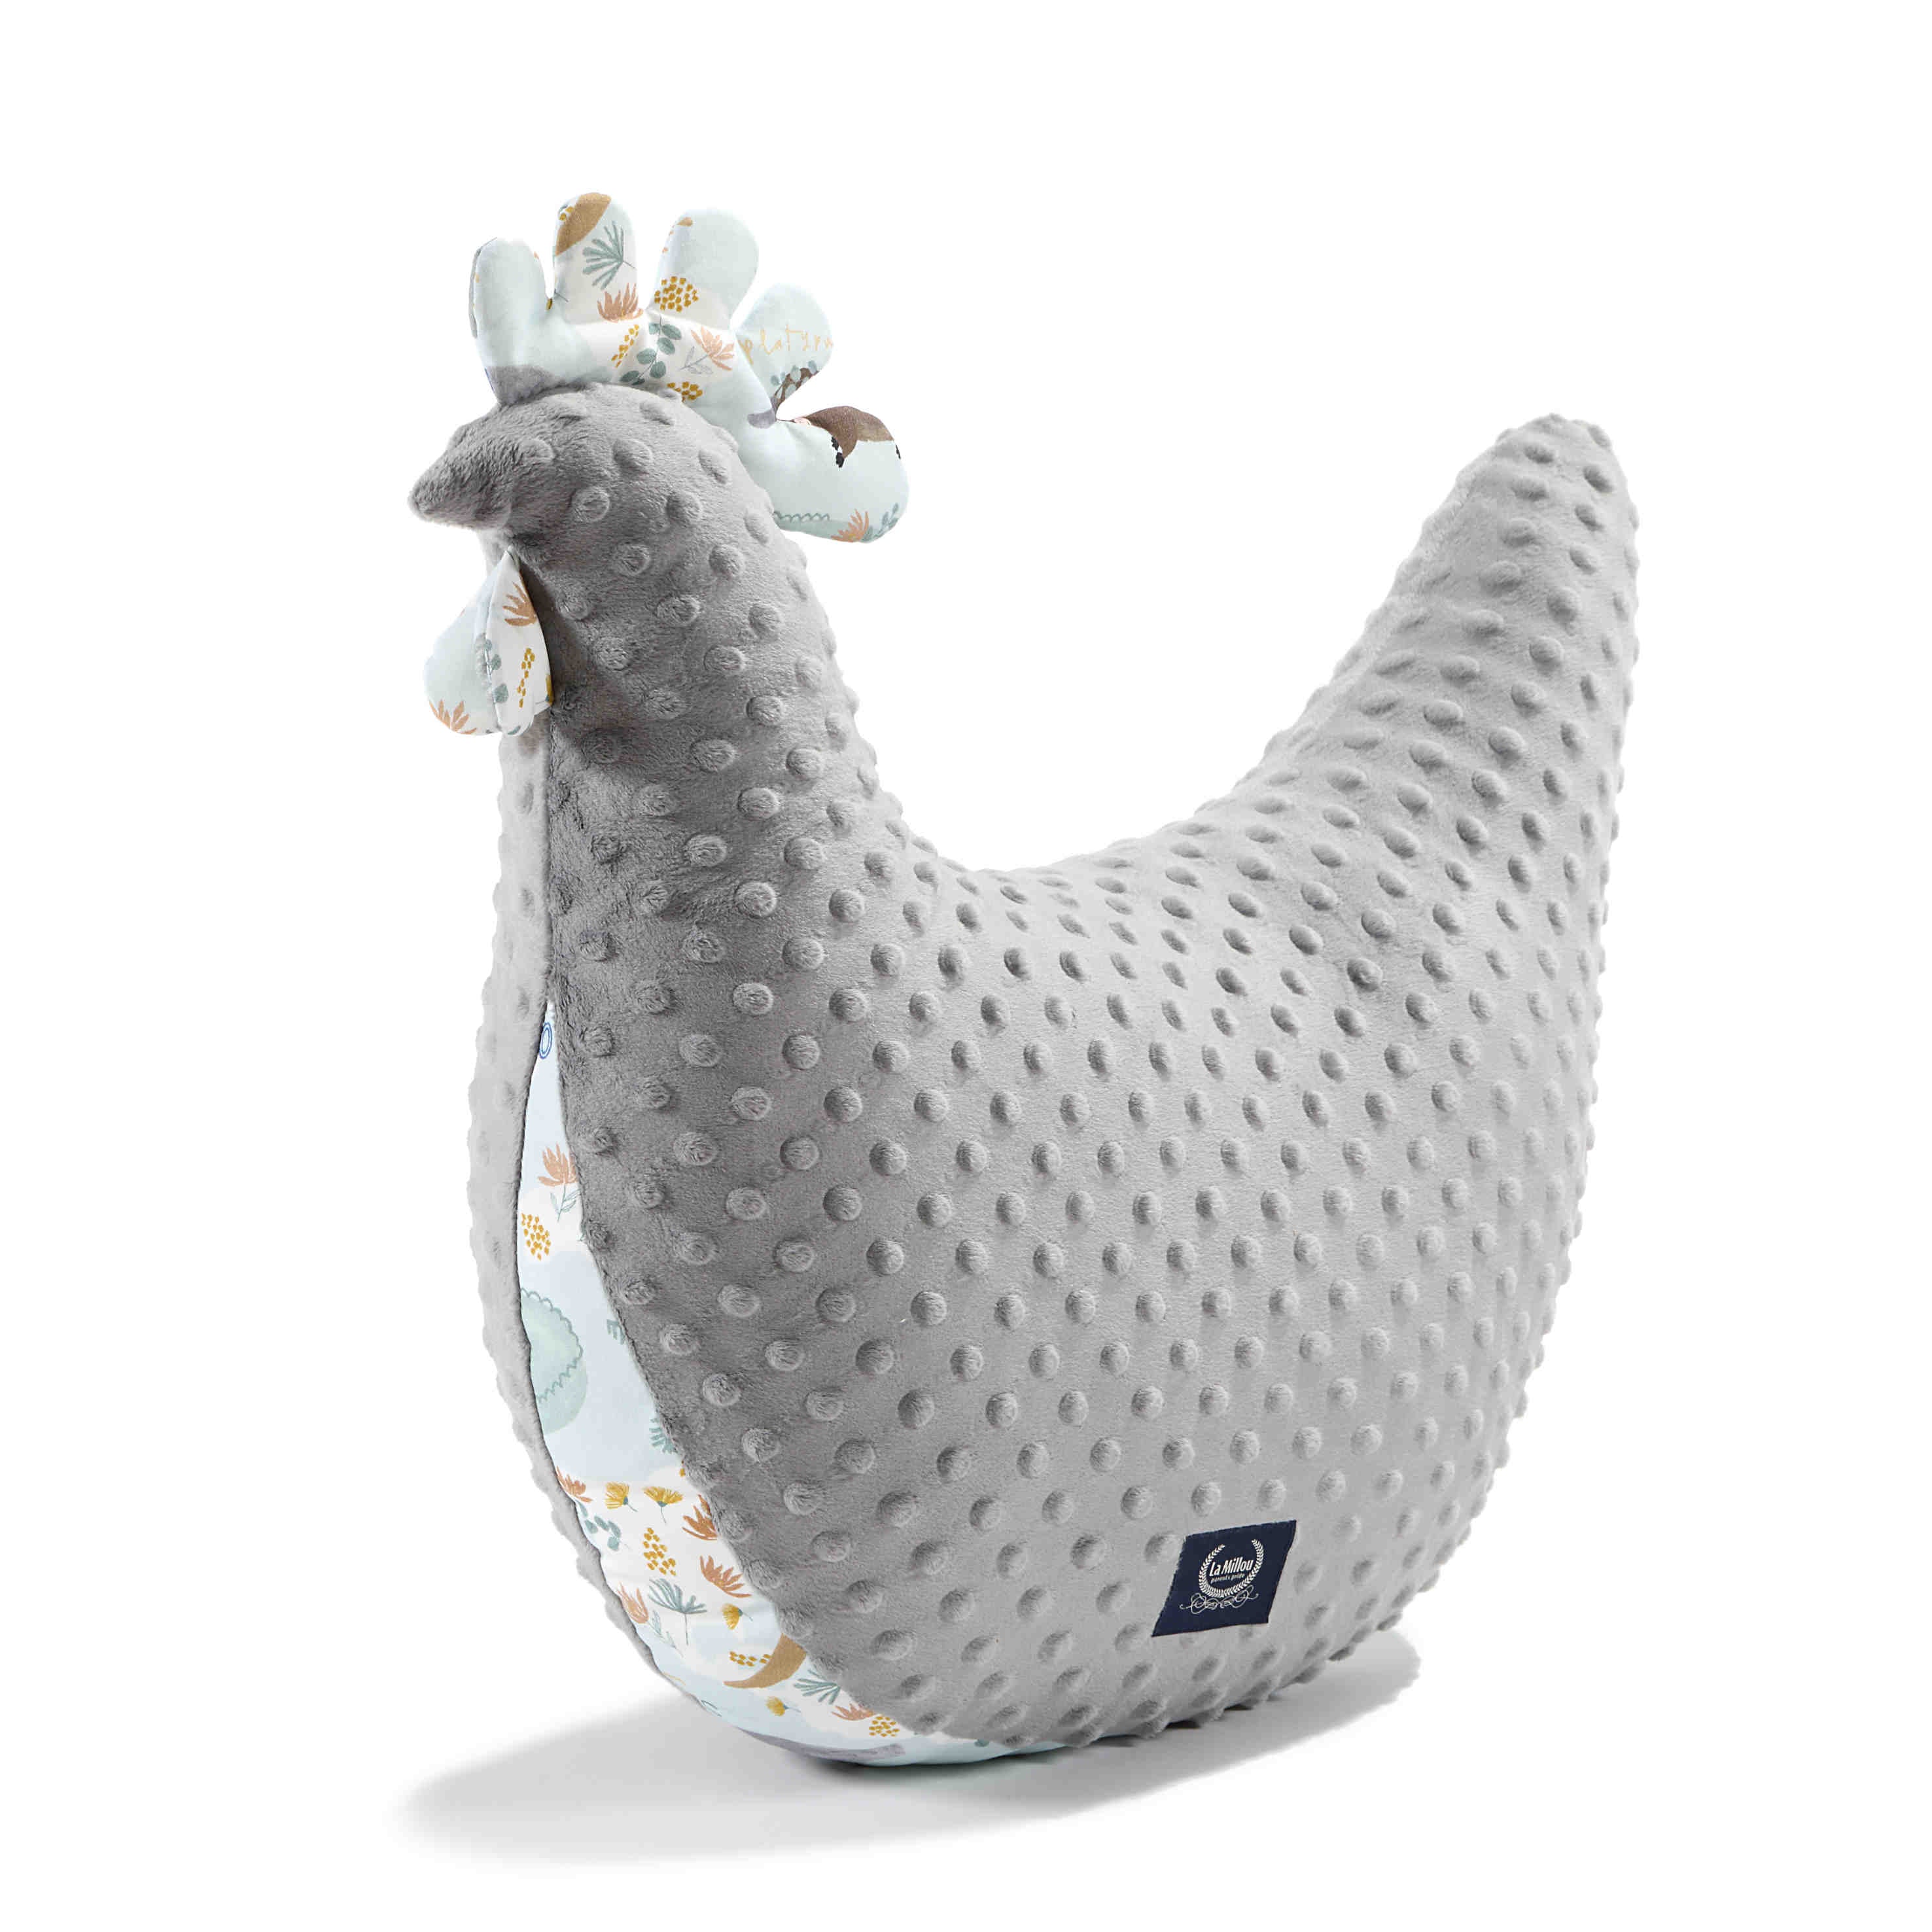 Nursing pillow Chic chick - Dundee and friends